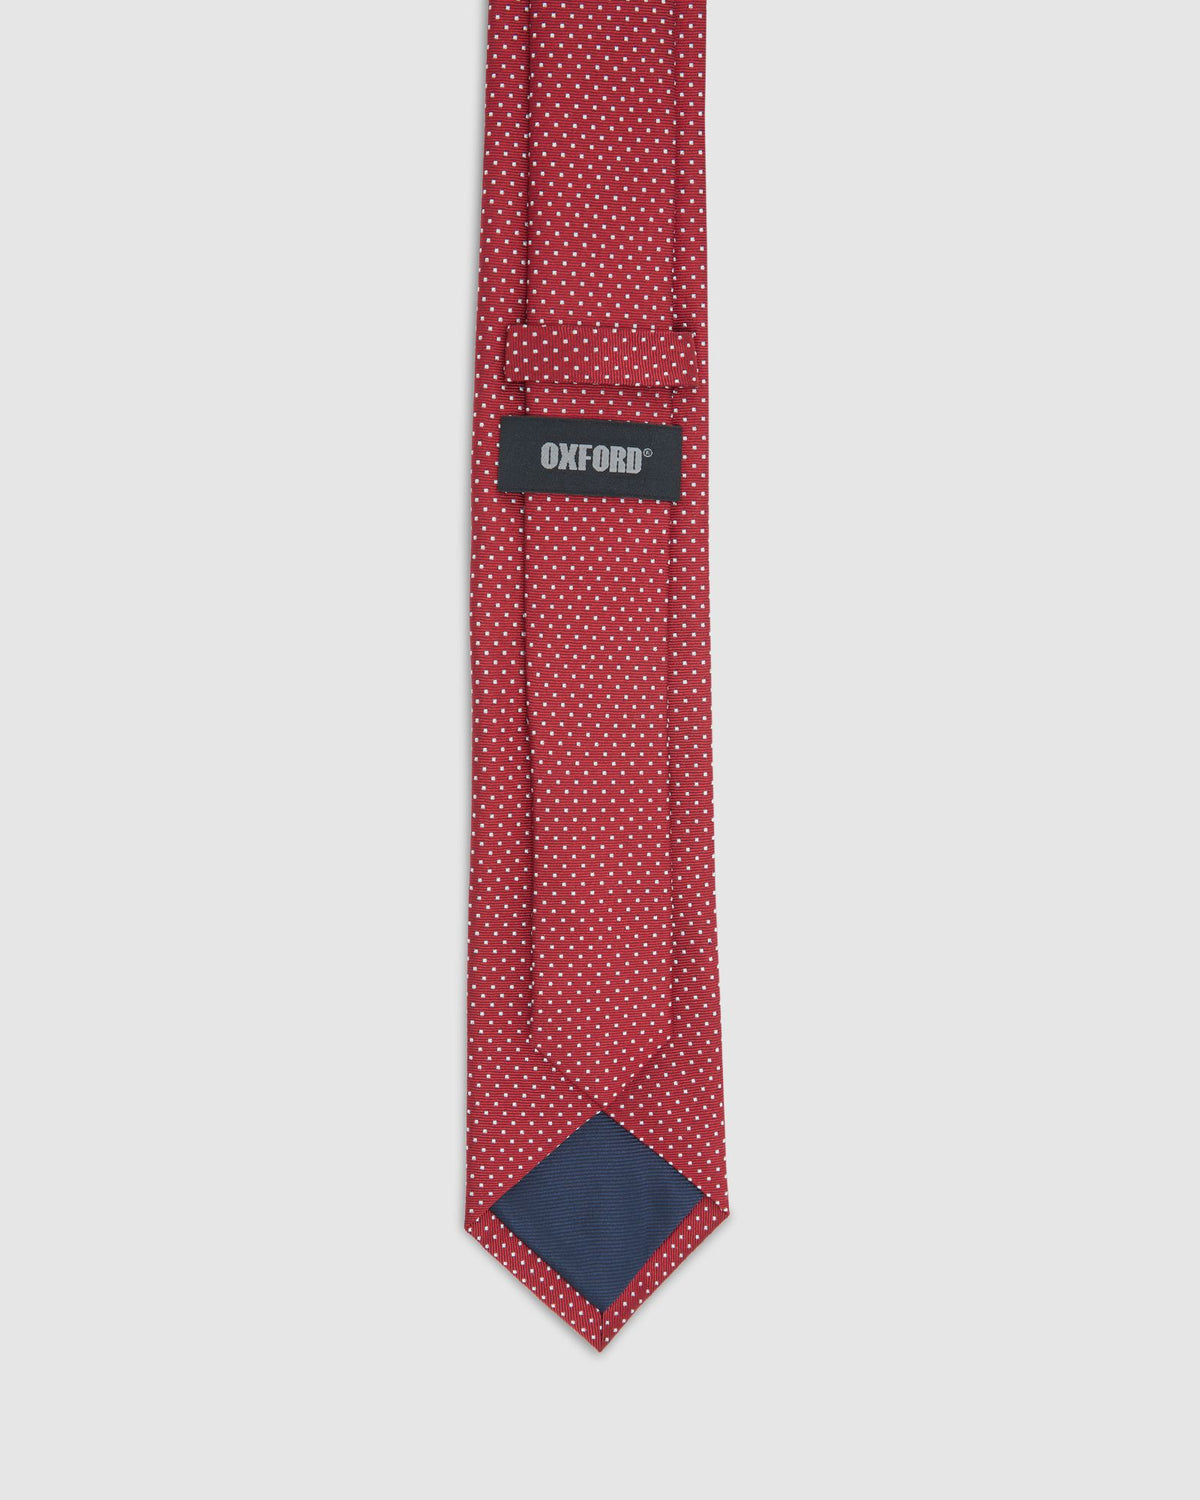 RED POLKA DOTS TIE MENS ACCESSORIES